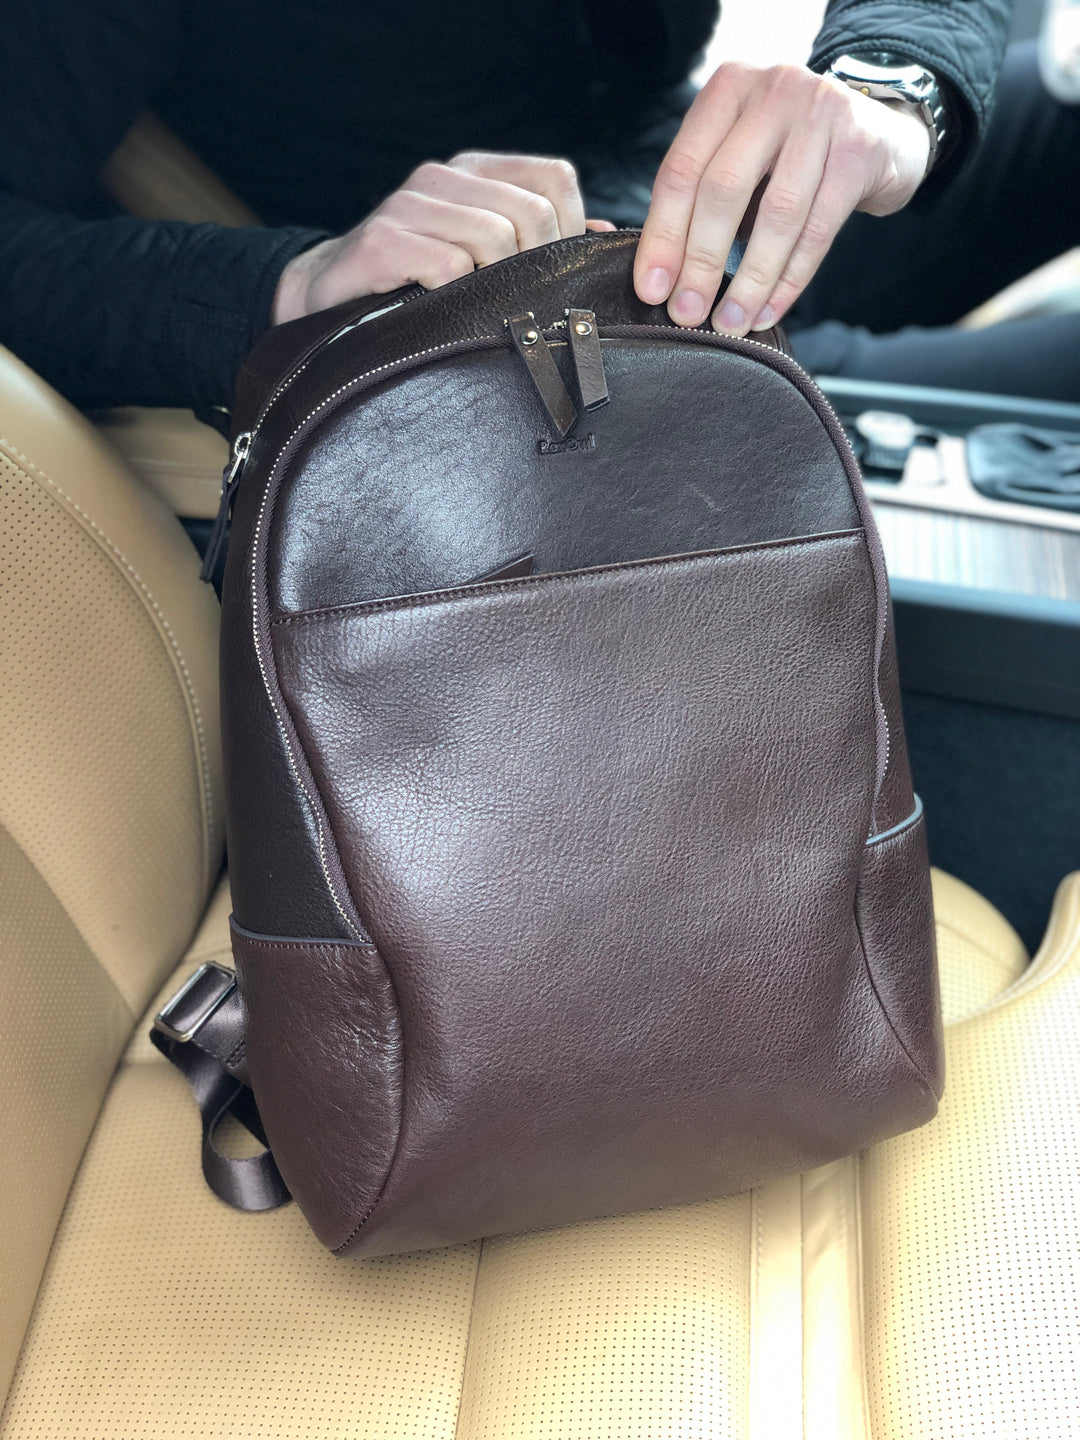 Voyager Leather Backpack - Brown